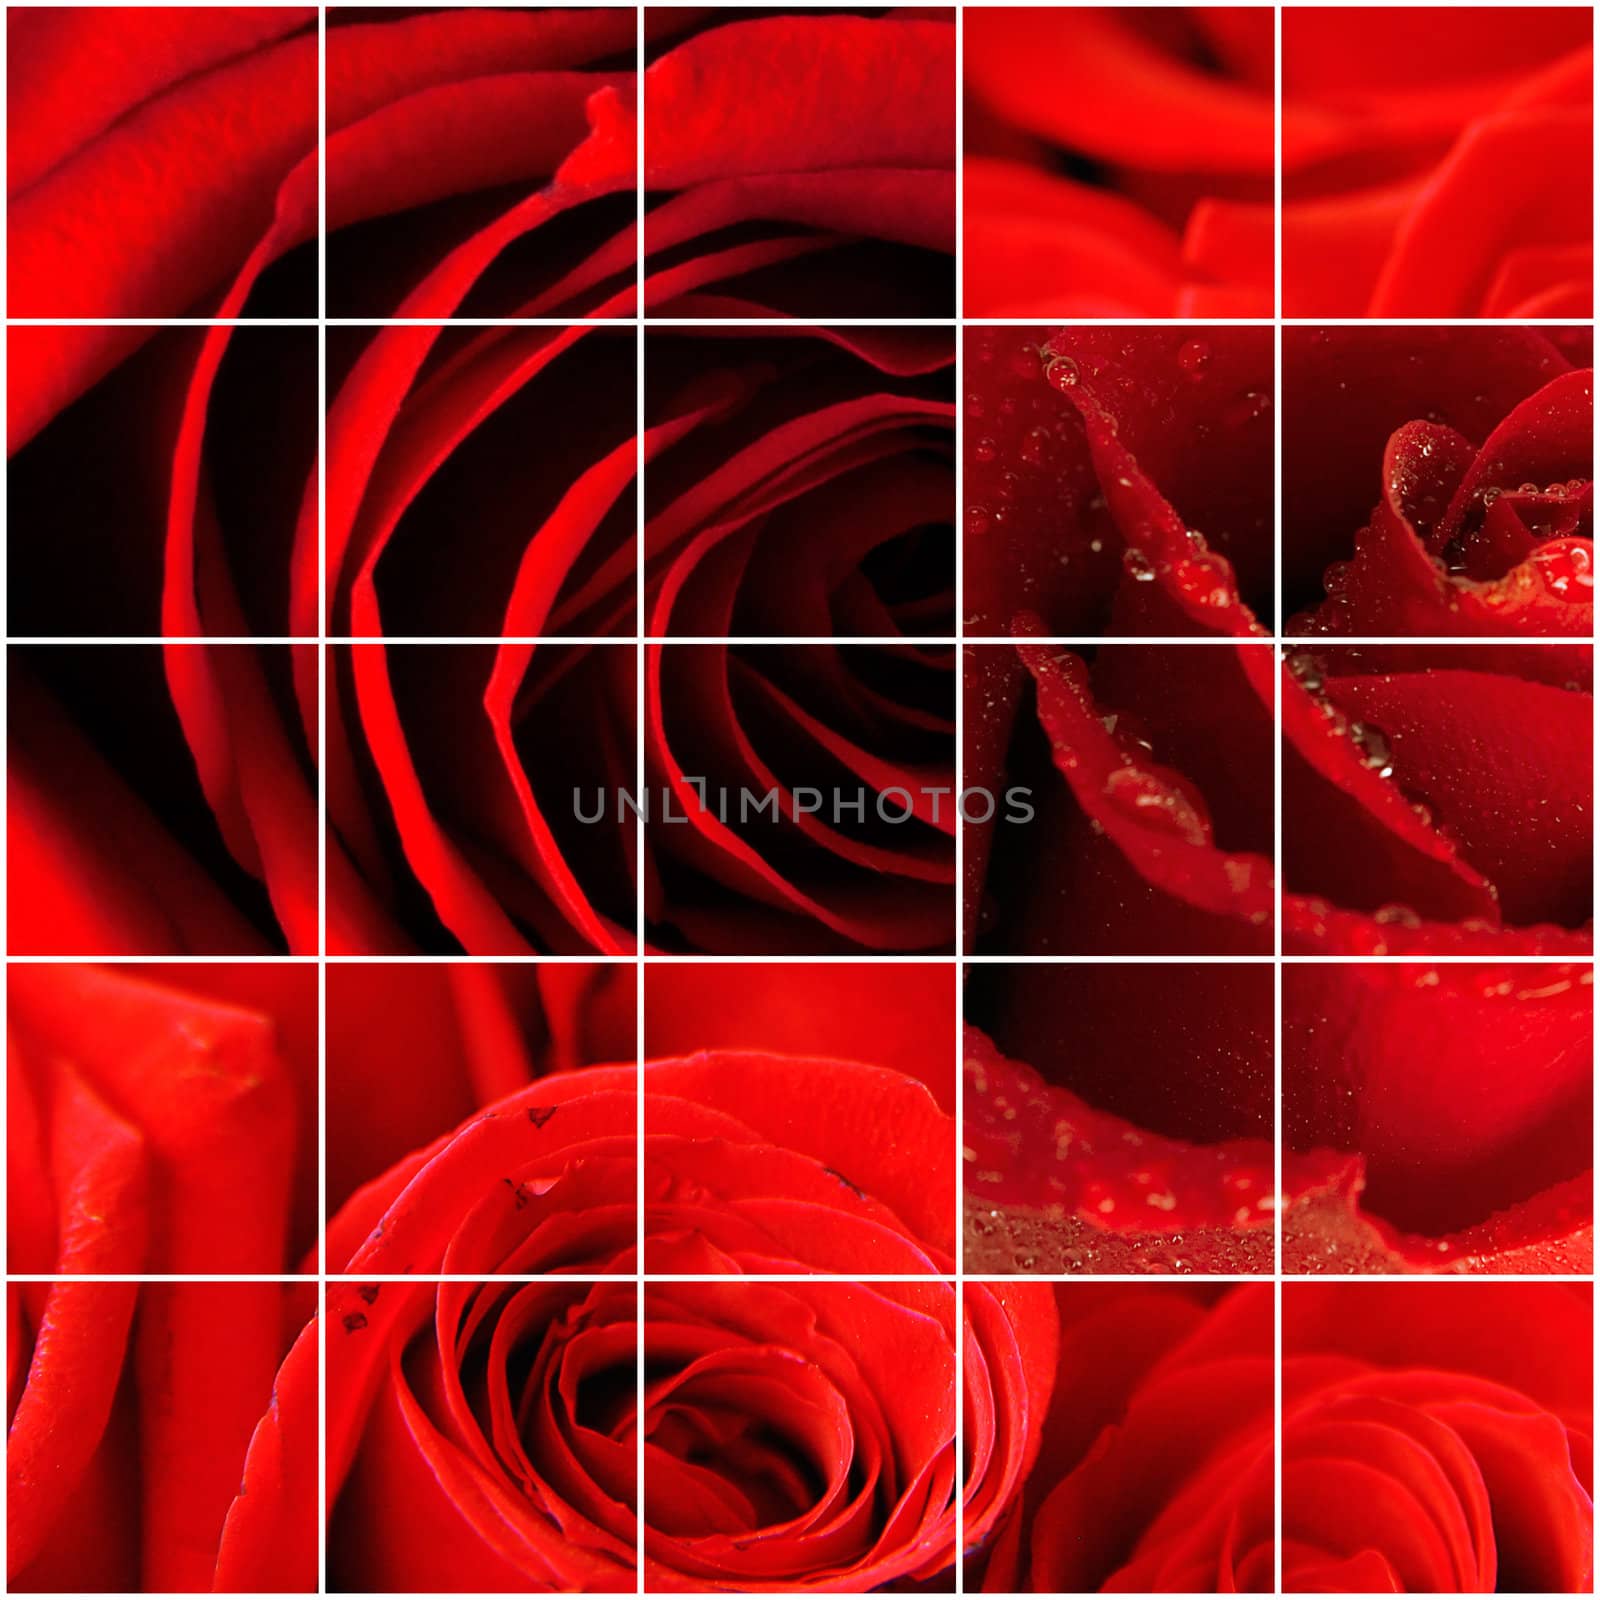 bright red rose petals as a celebratory background